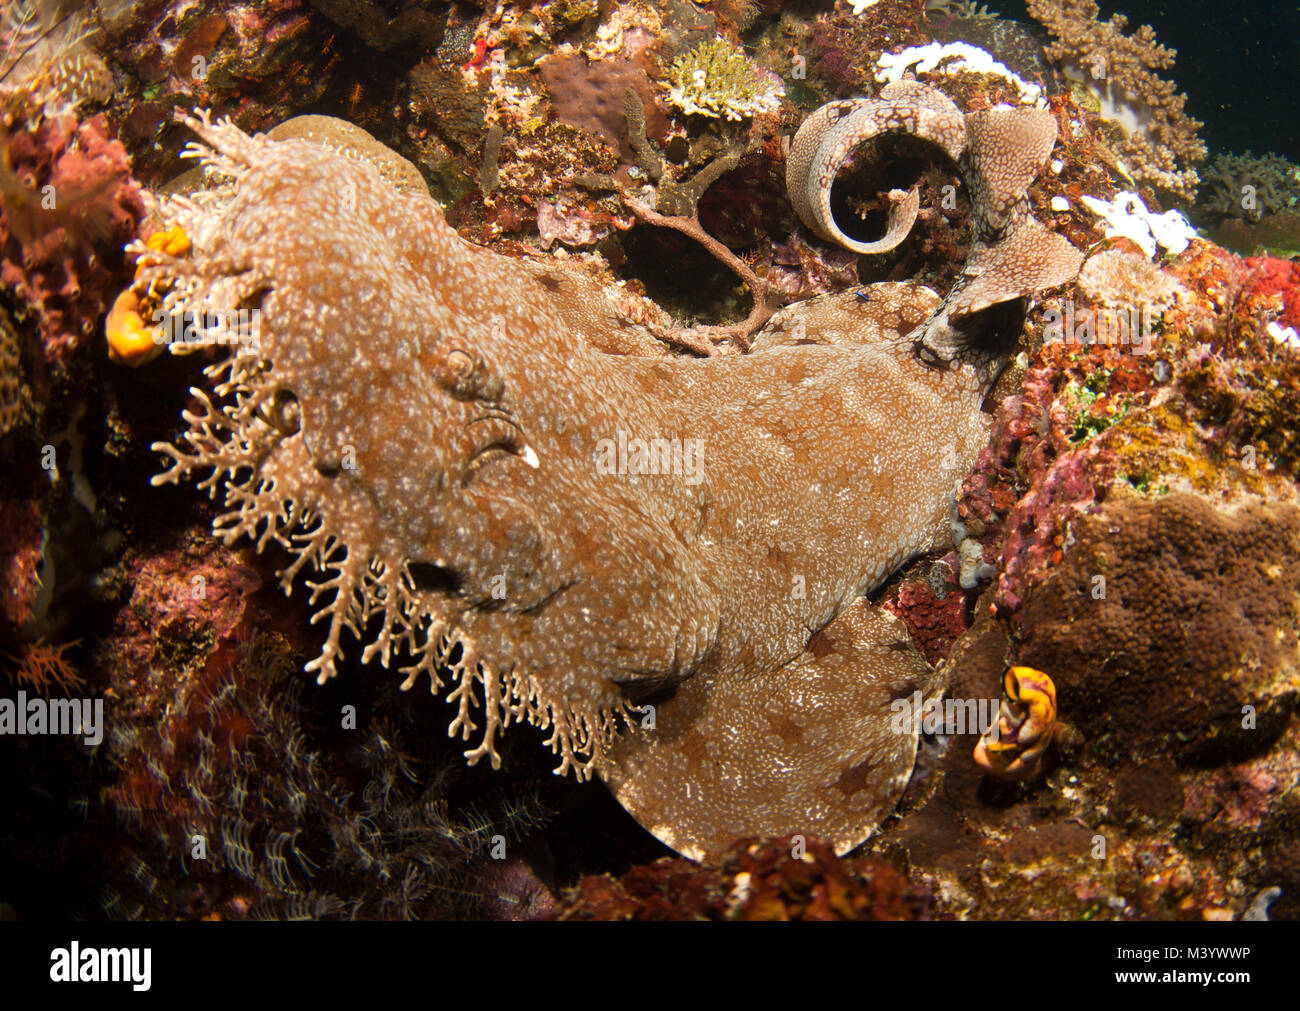 Wobbegongs, or carpet sharks, are common reef inhabitants in many areas of the south Pacific Stock Photo